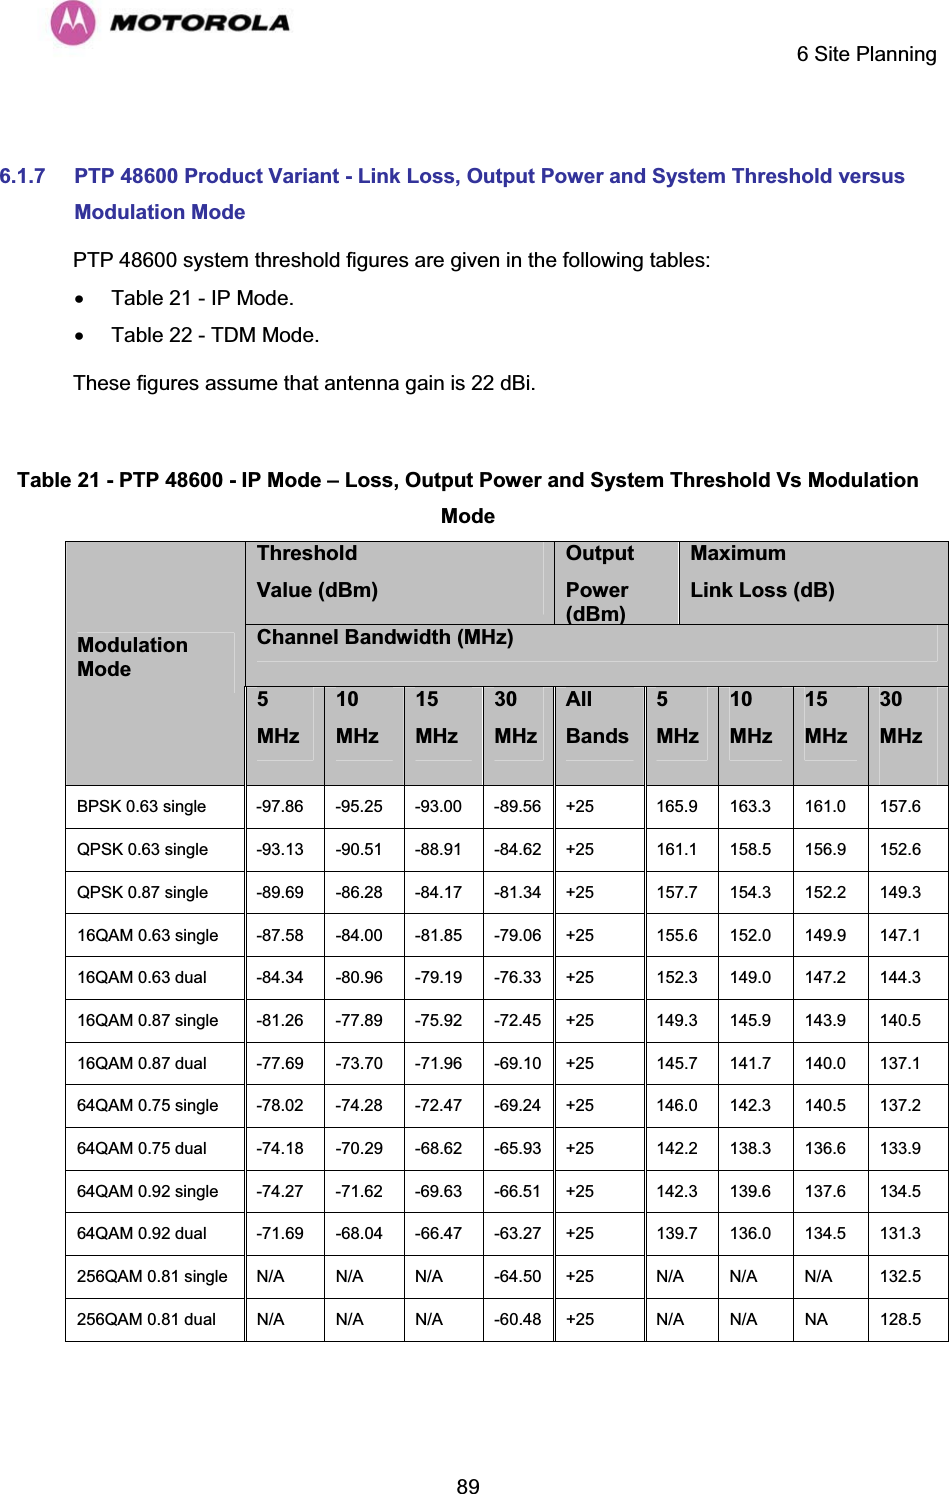     6 Site Planning  89 6.1.7 PTP 48600 Product Variant - Link Loss, Output Power and System Threshold versus Modulation Mode PTP 48600 system threshold figures are given in the following tables: x  Table 21 - IP Mode. x  Table 22 - TDM Mode. These figures assume that antenna gain is 22 dBi.  Table 21 - PTP 48600 - IP Mode – Loss, Output Power and System Threshold Vs Modulation ModeThreshold Value (dBm) Output Power (dBm)MaximumLink Loss (dB) Channel Bandwidth (MHz) ModulationMode5MHz10MHz15MHz30MHzAllBands 5MHz10MHz15MHz30MHzBPSK 0.63 single  -97.86   -95.25   -93.00   -89.56  +25  165.9   163.3   161.0   157.6  QPSK 0.63 single  -93.13   -90.51   -88.91   -84.62  +25  161.1   158.5   156.9   152.6  QPSK 0.87 single  -89.69   -86.28   -84.17   -81.34  +25  157.7   154.3   152.2   149.3  16QAM 0.63 single  -87.58   -84.00   -81.85   -79.06  +25  155.6   152.0   149.9   147.1  16QAM 0.63 dual  -84.34   -80.96   -79.19   -76.33  +25  152.3   149.0   147.2   144.3  16QAM 0.87 single  -81.26   -77.89   -75.92   -72.45  +25  149.3   145.9   143.9   140.5  16QAM 0.87 dual  -77.69   -73.70   -71.96   -69.10  +25  145.7   141.7   140.0   137.1  64QAM 0.75 single  -78.02   -74.28   -72.47   -69.24  +25  146.0   142.3   140.5   137.2  64QAM 0.75 dual  -74.18   -70.29   -68.62   -65.93  +25  142.2   138.3   136.6   133.9  64QAM 0.92 single  -74.27   -71.62   -69.63   -66.51  +25  142.3   139.6   137.6   134.5  64QAM 0.92 dual  -71.69   -68.04   -66.47   -63.27  +25  139.7   136.0   134.5   131.3  256QAM 0.81 single  N/A   N/A   N/A   -64.50  +25  N/A   N/A   N/A   132.5  256QAM 0.81 dual  N/A   N/A   N/A   -60.48  +25  N/A   N/A   NA   128.5   